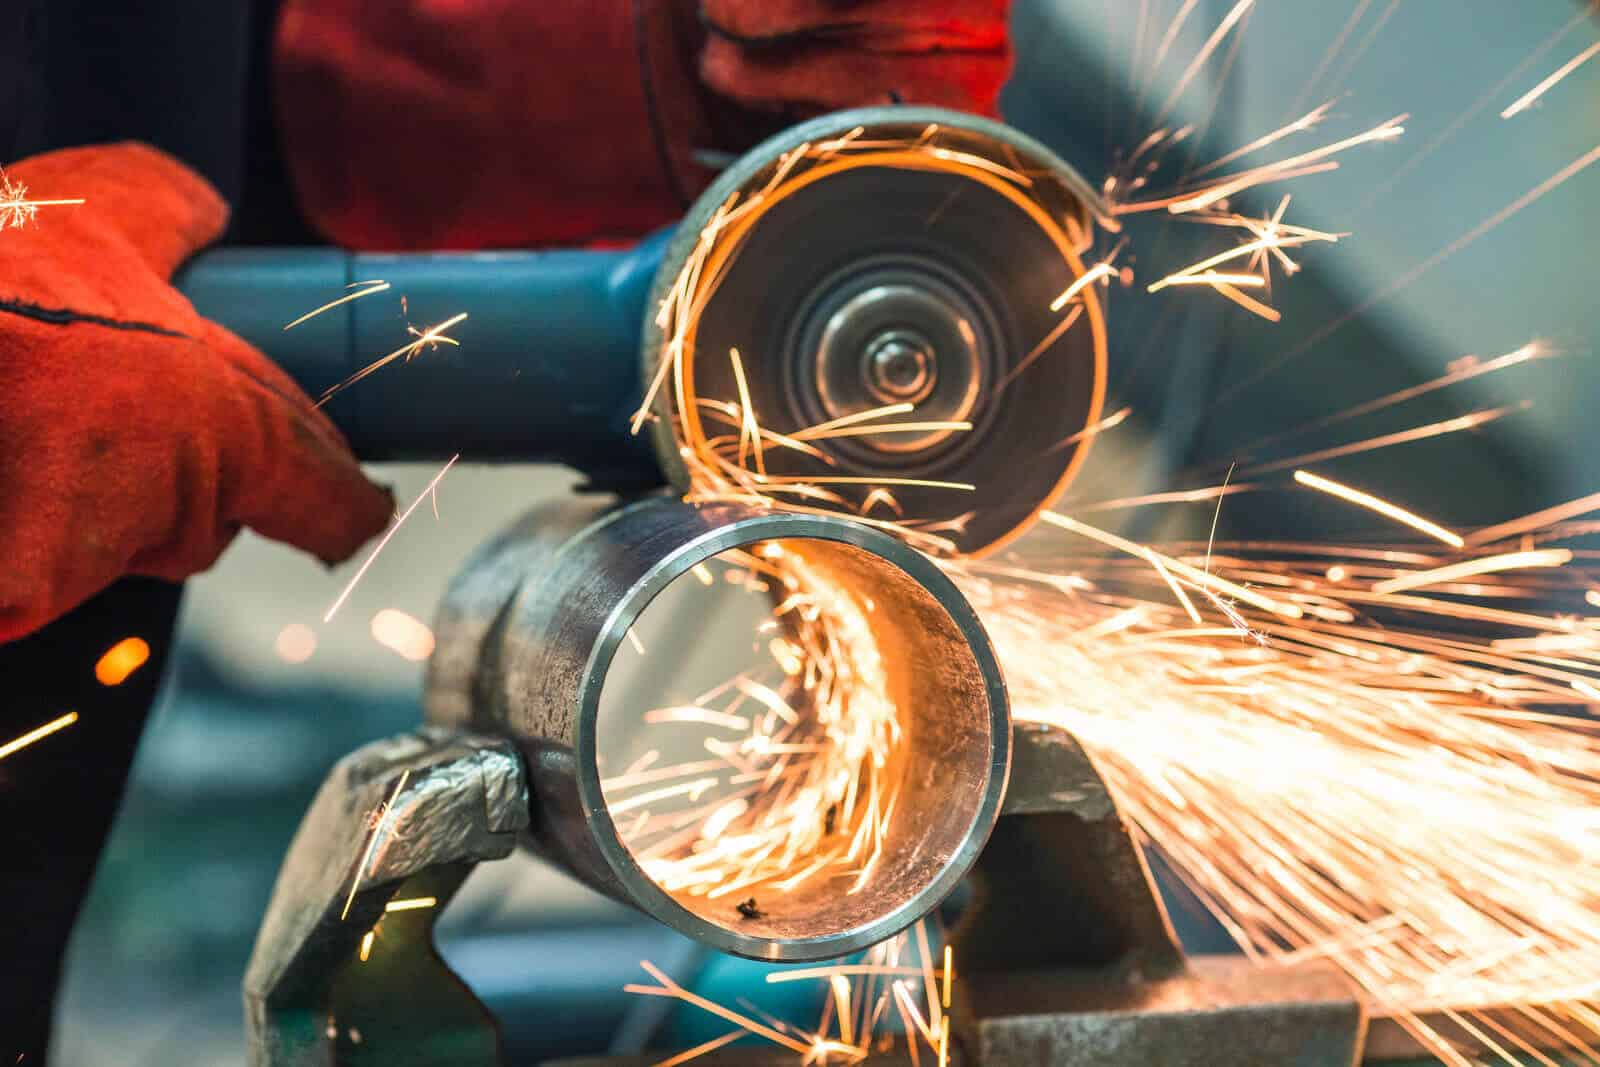 How To Cut Stainless Steel With Angle Grinder? - Binic Abrasive